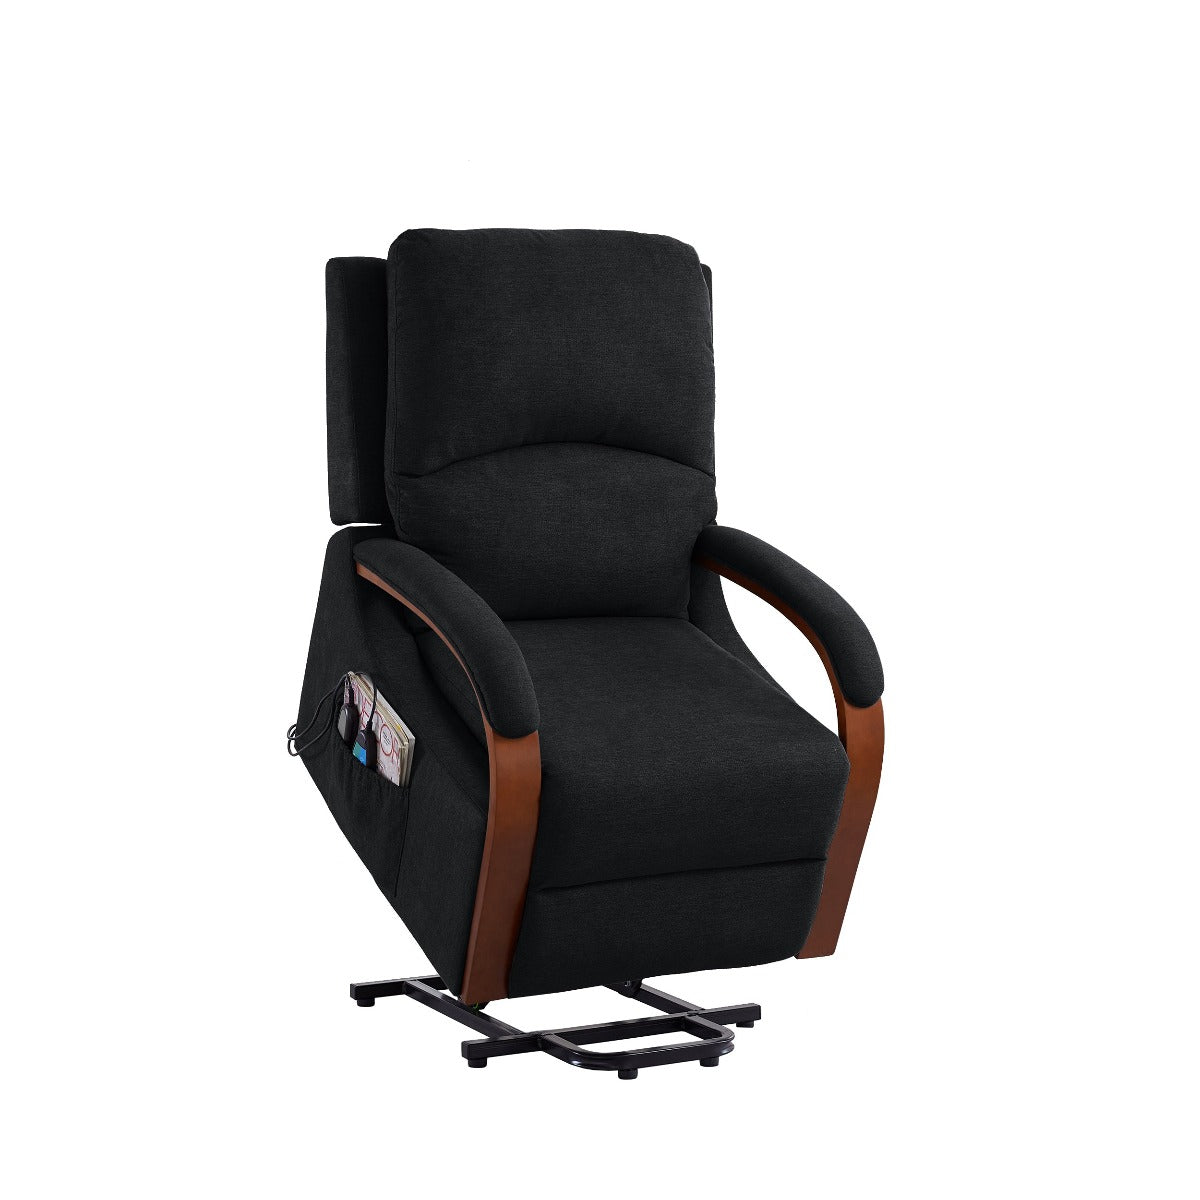 Power Lift Recliner Message Chair Soft Charcoal colored Fabric front view lifted no background